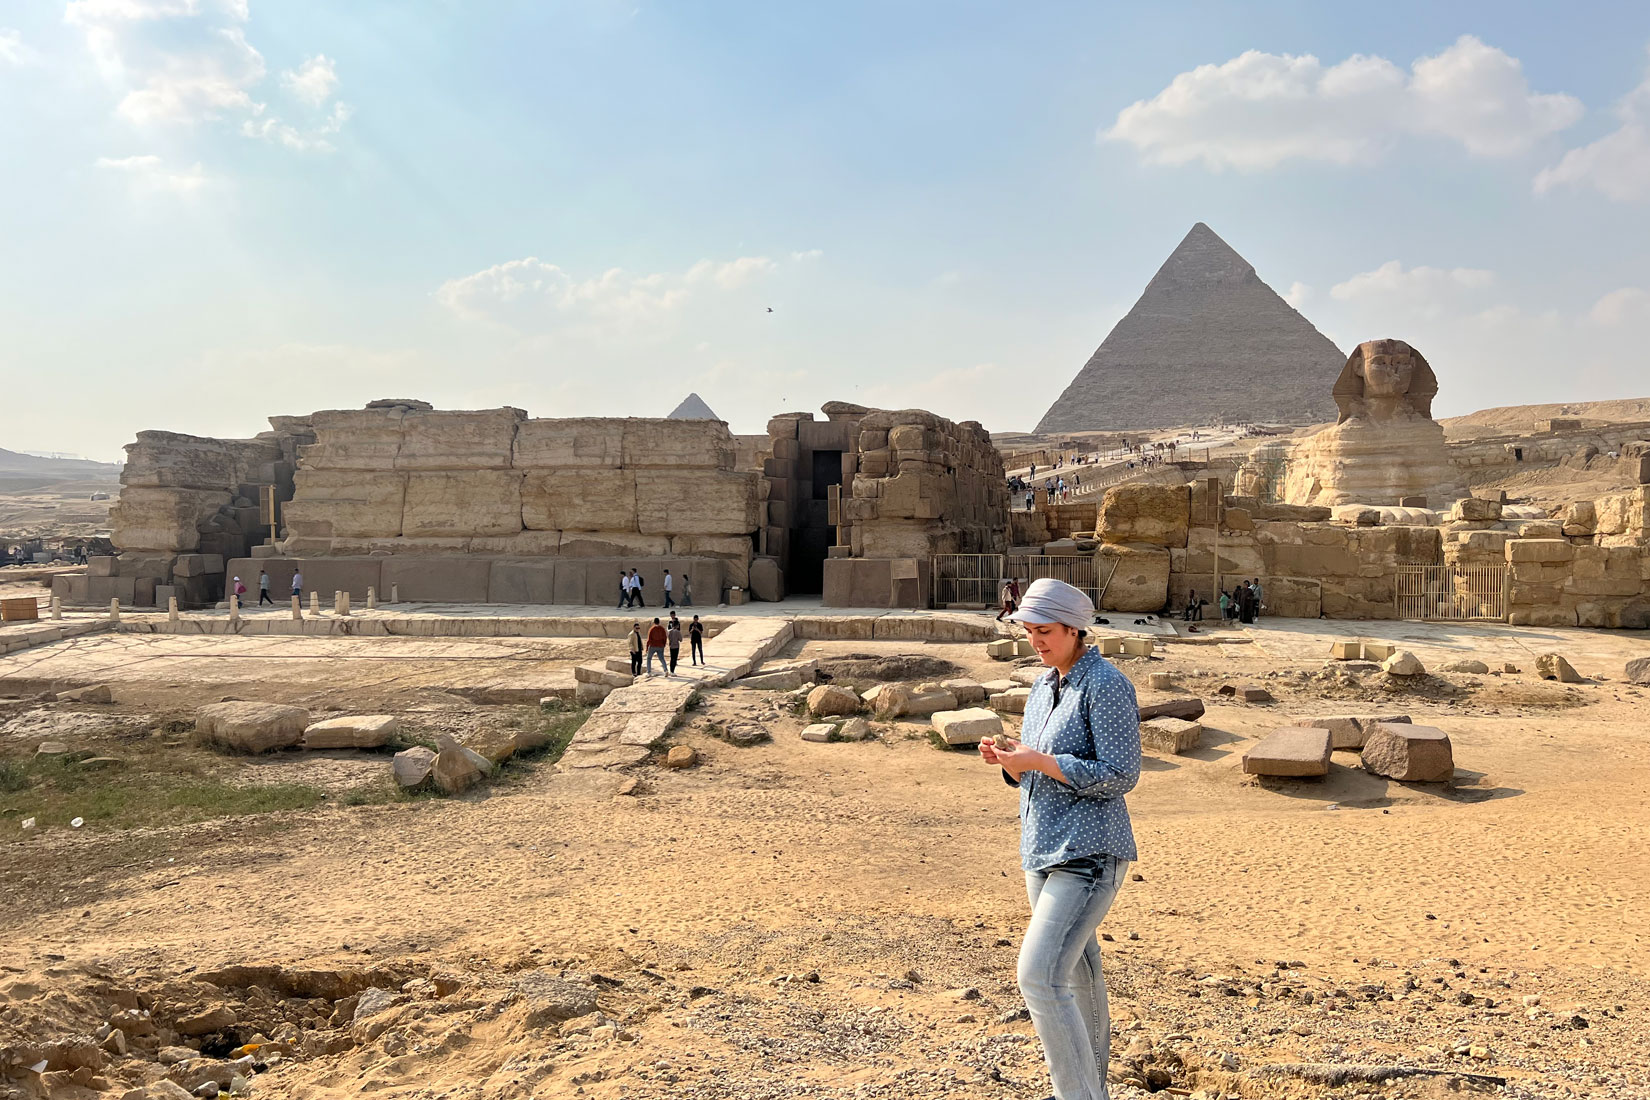 Eman Ghoneim studies the surface topography of the section of the ancient Ahramat Branch located in front of the Pyramids of Giza and the Great Sphinx.